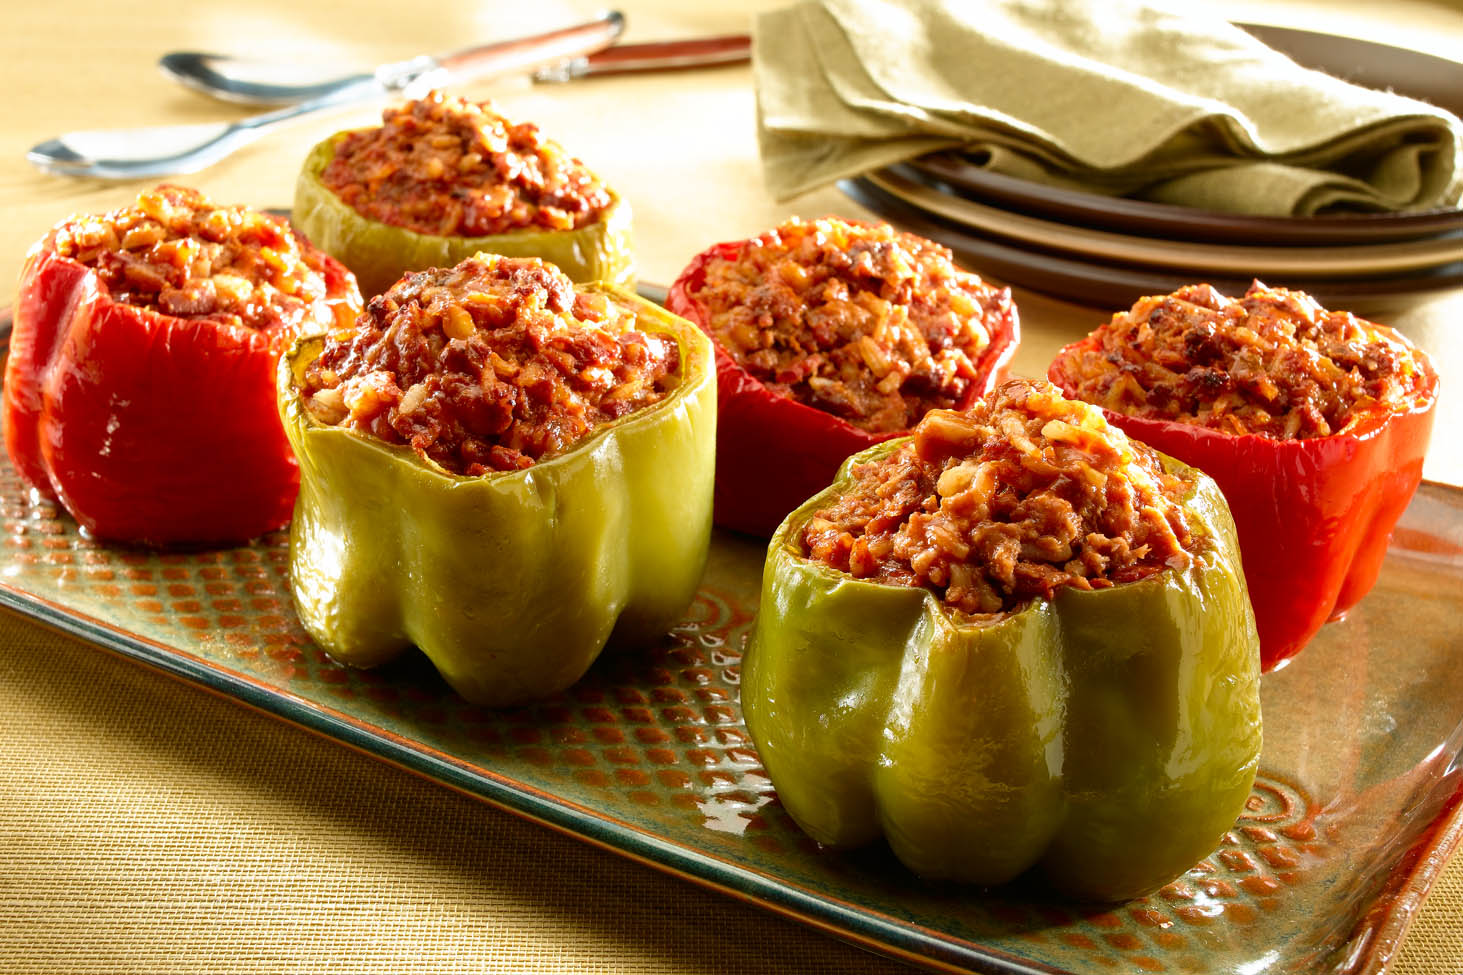 Spanish-Style Stuffed Peppers